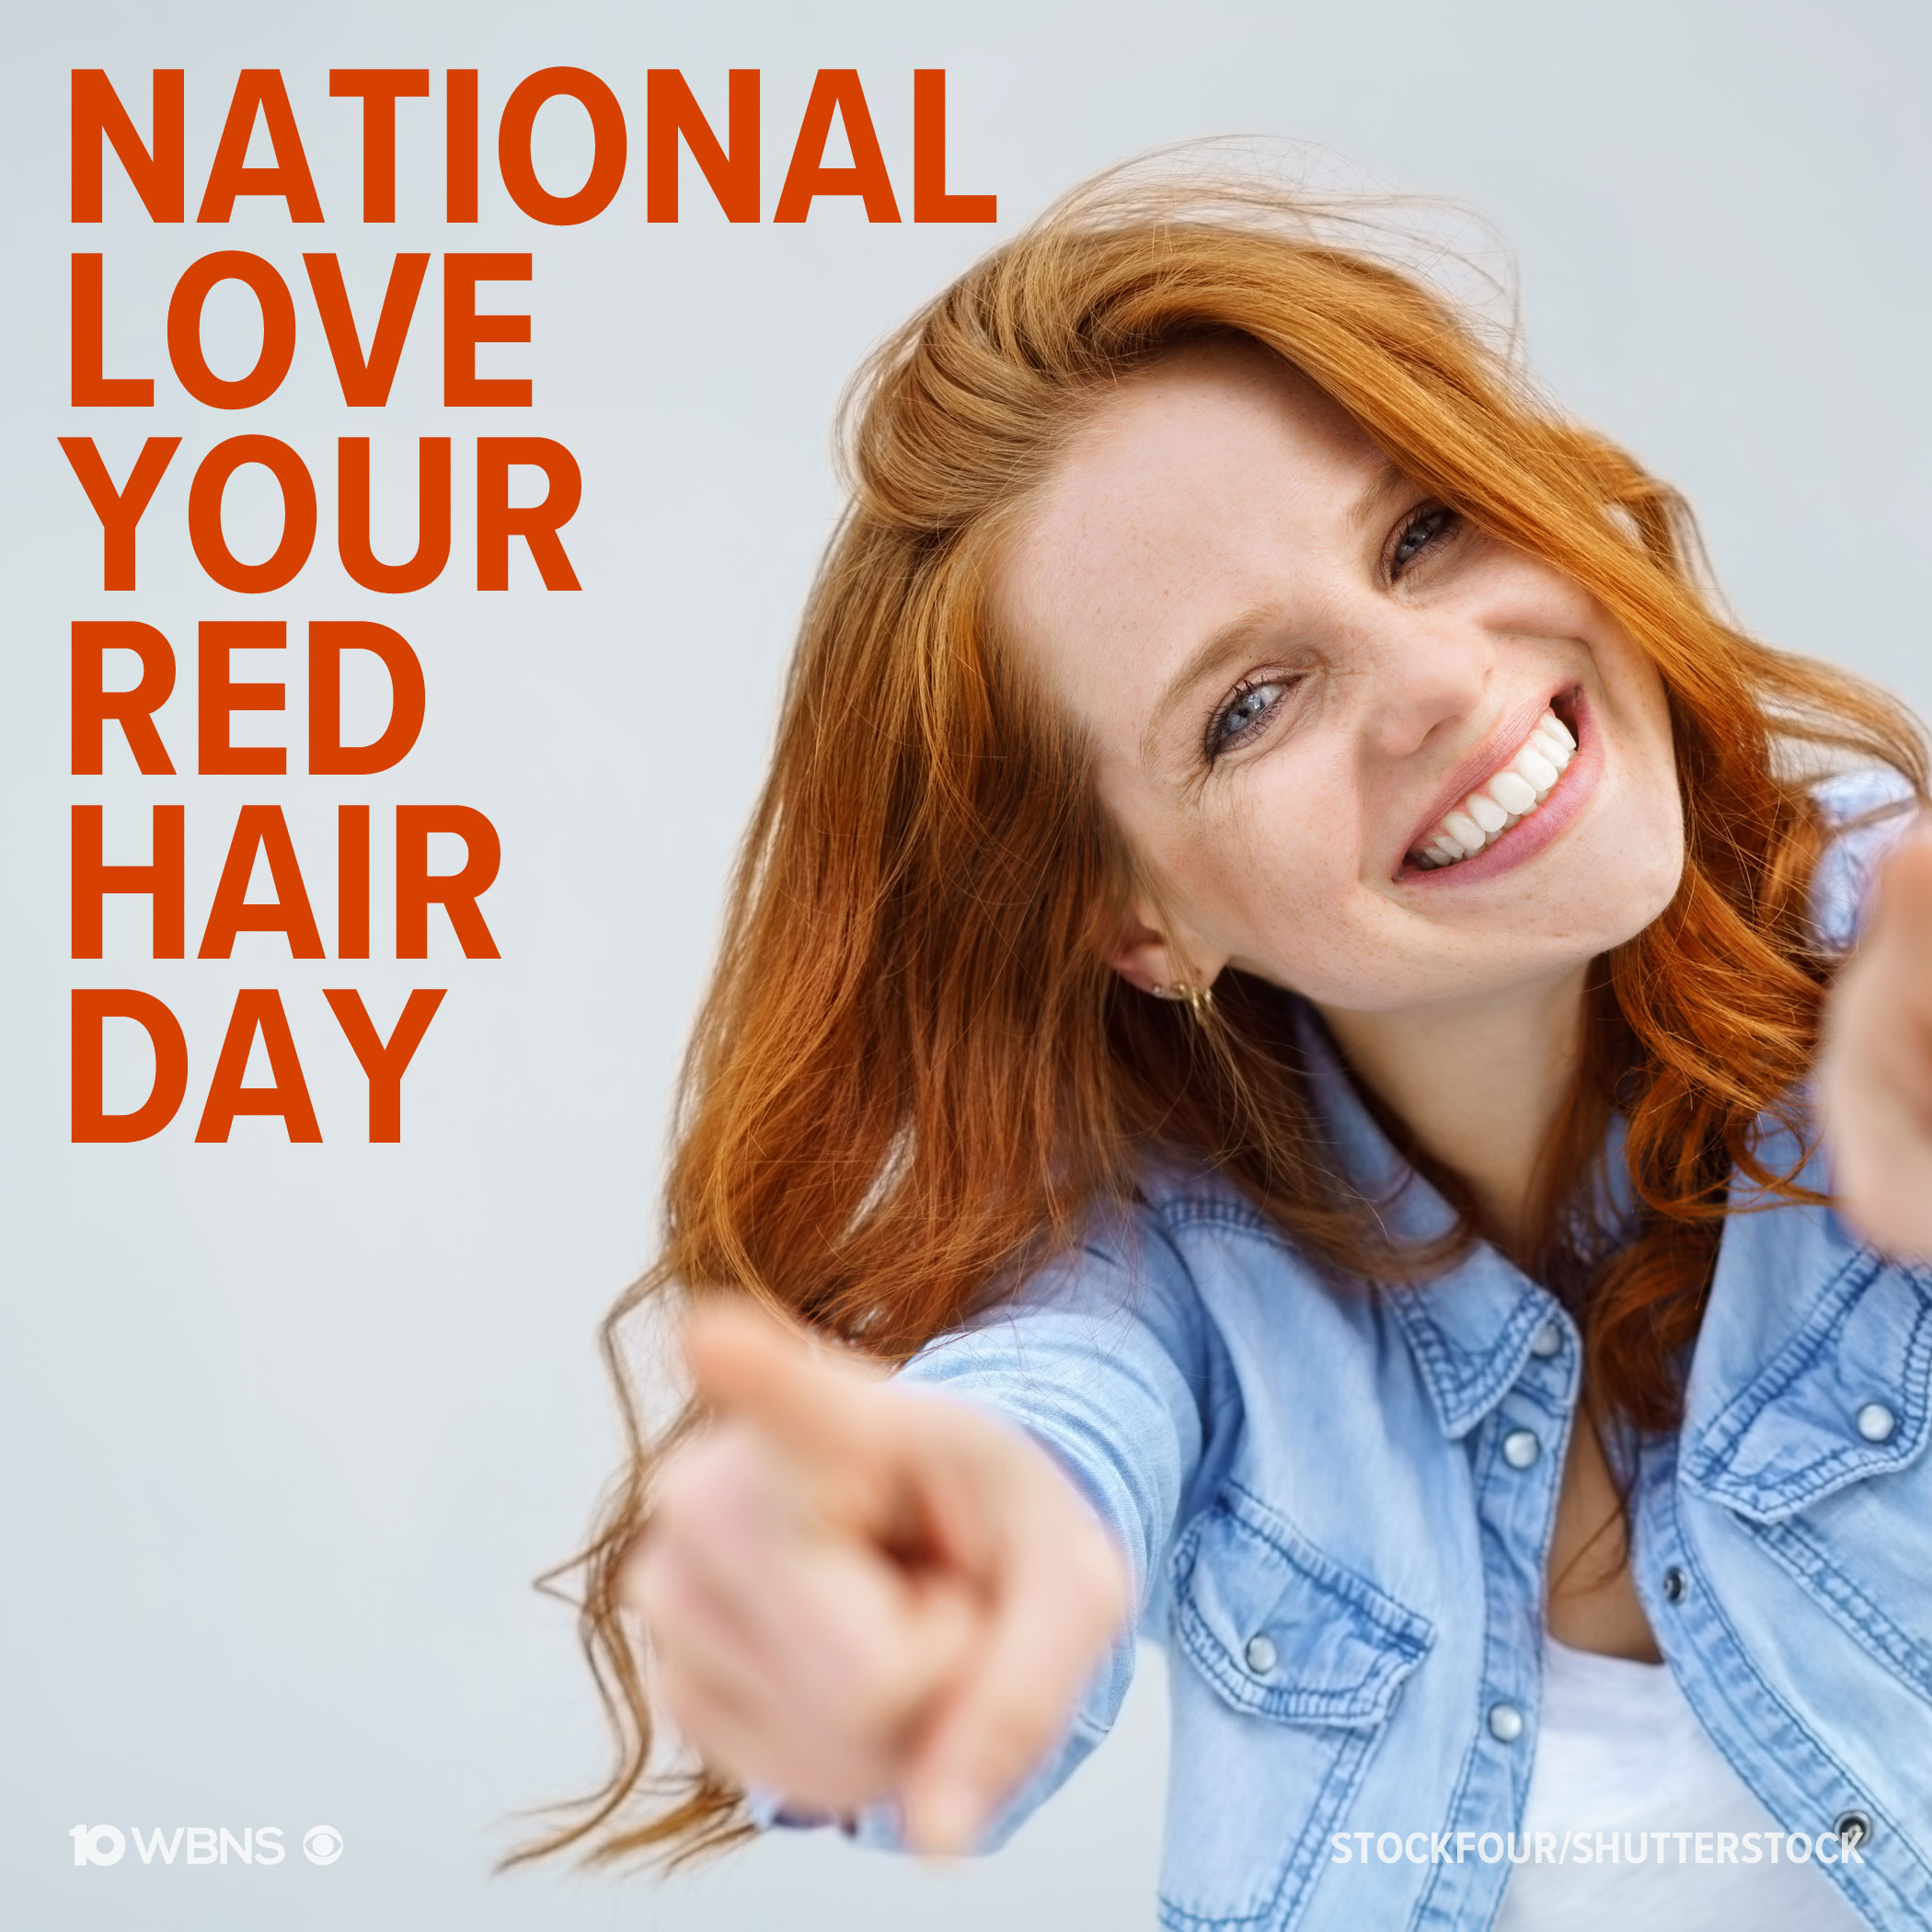 Forud type stak Hvad er der galt 10TV on Twitter: "Today is National Love Your Red Hair Day! Redheads, today  is YOUR day! | 16 fun facts about redheads: https://t.co/g06B371L9A #10TV  https://t.co/EC7lDBzF9X" / Twitter